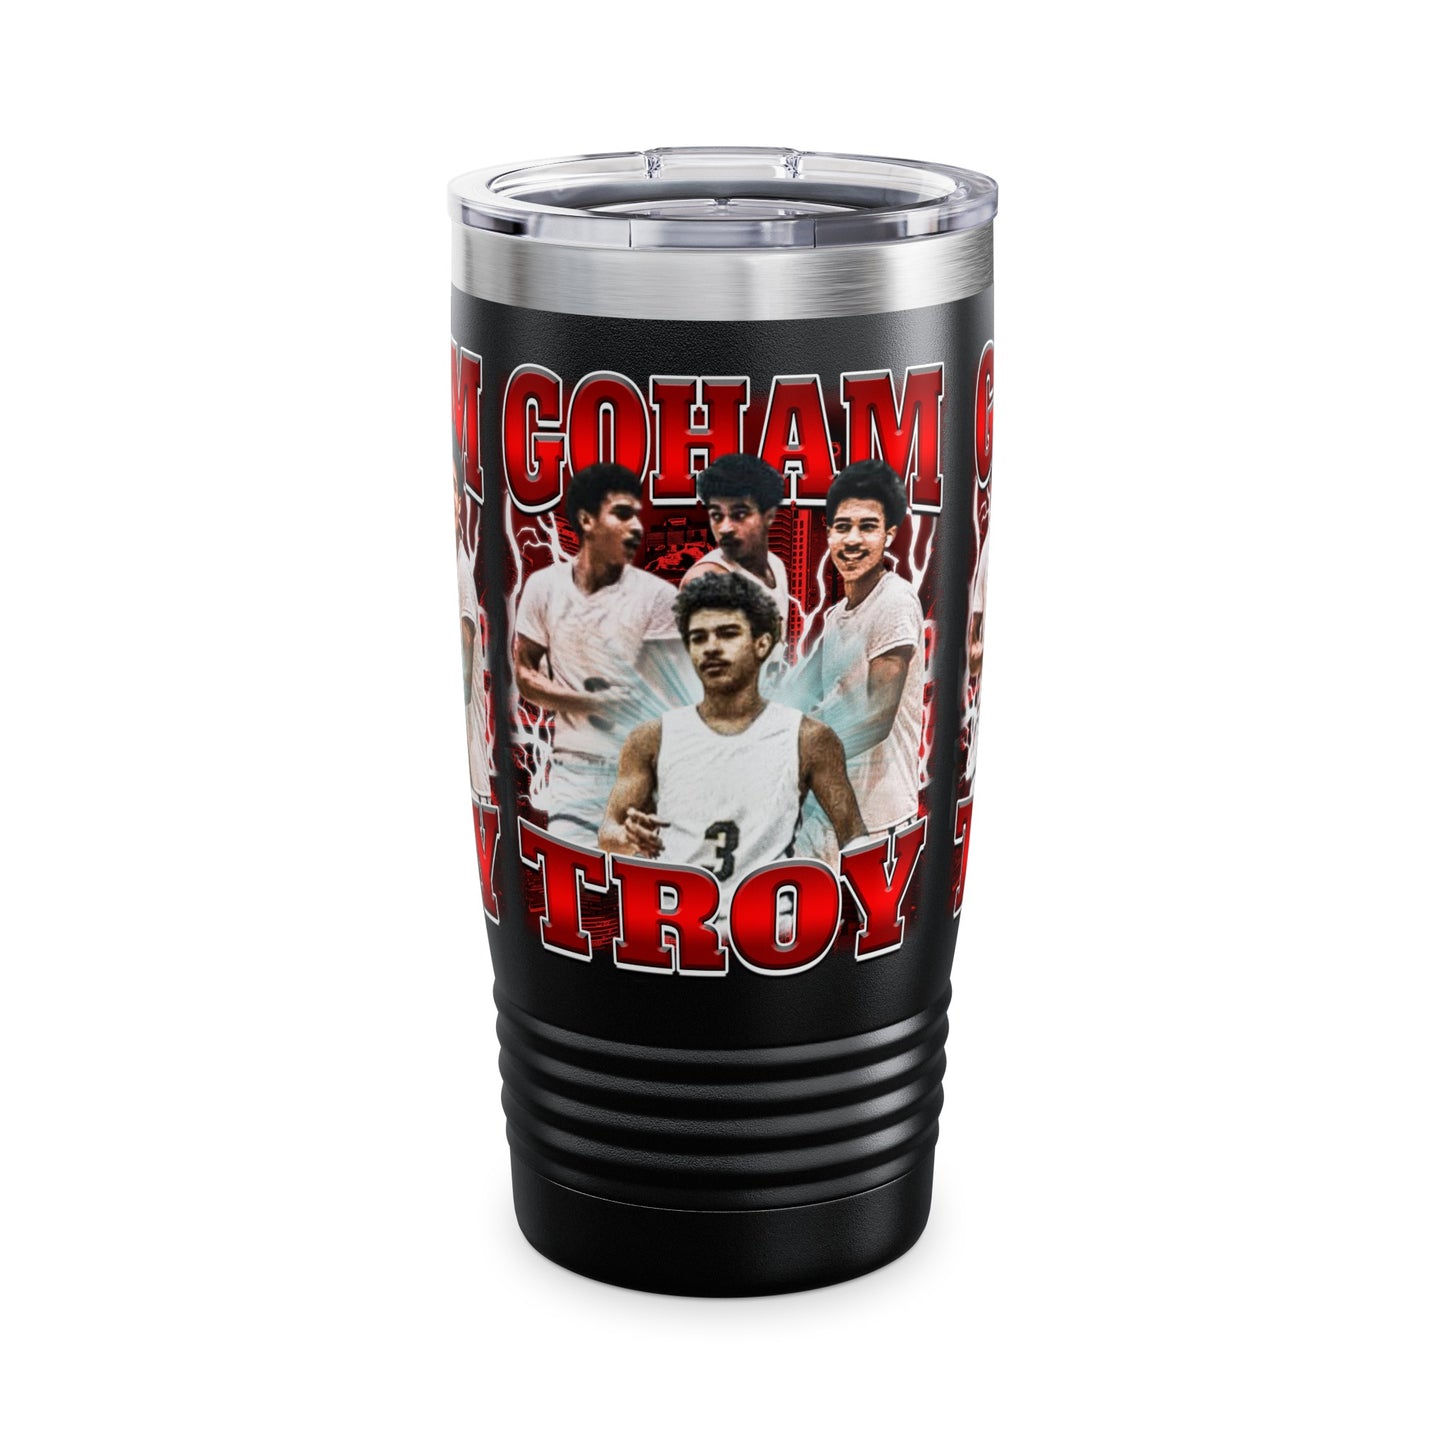 Goham Troy Stainless Steal Tumbler